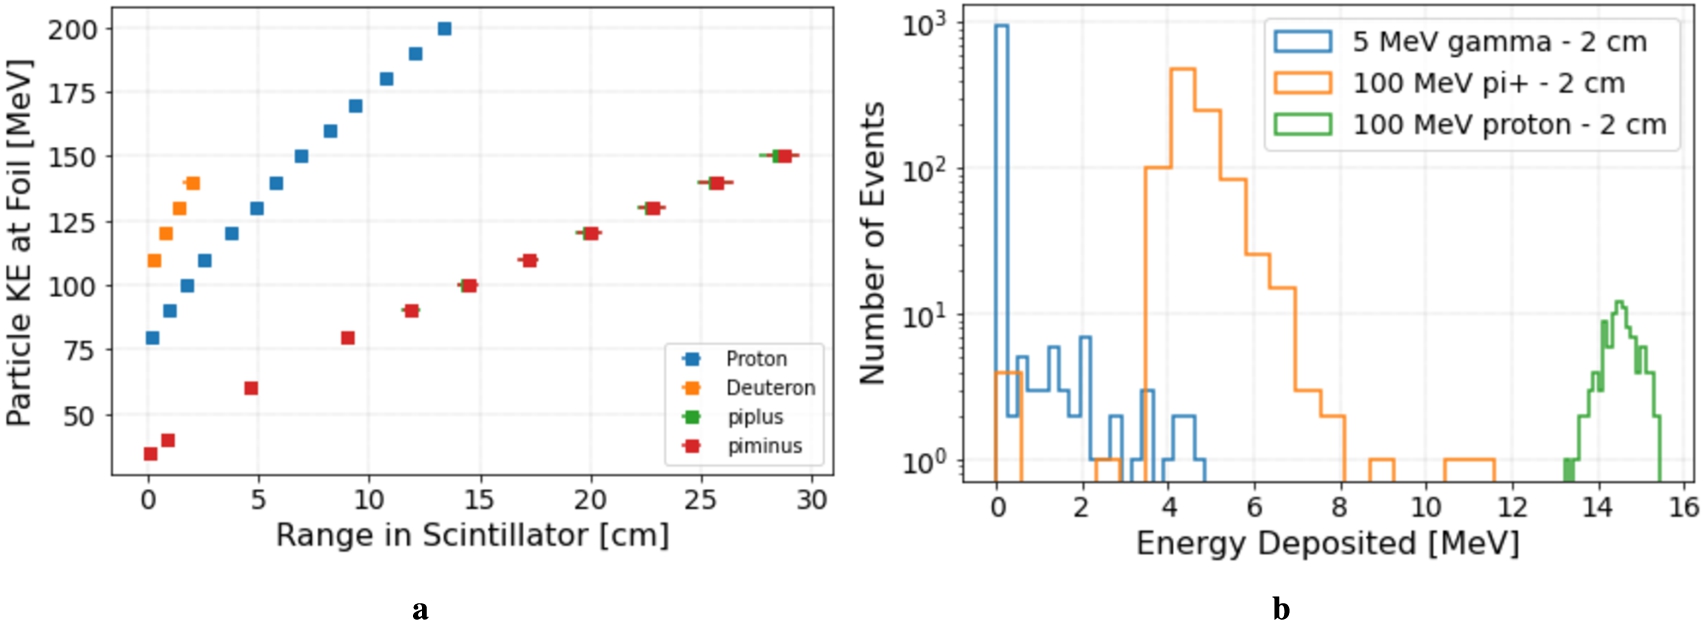 Simulations of particle interactions in the HRD: (a) the range of particle in the scintillator plastic after passing through the vacuum tube and other detector material (b) energy lost in 2 cm of scintillator plastic for a range of particles and energies. Figure from reference [92].